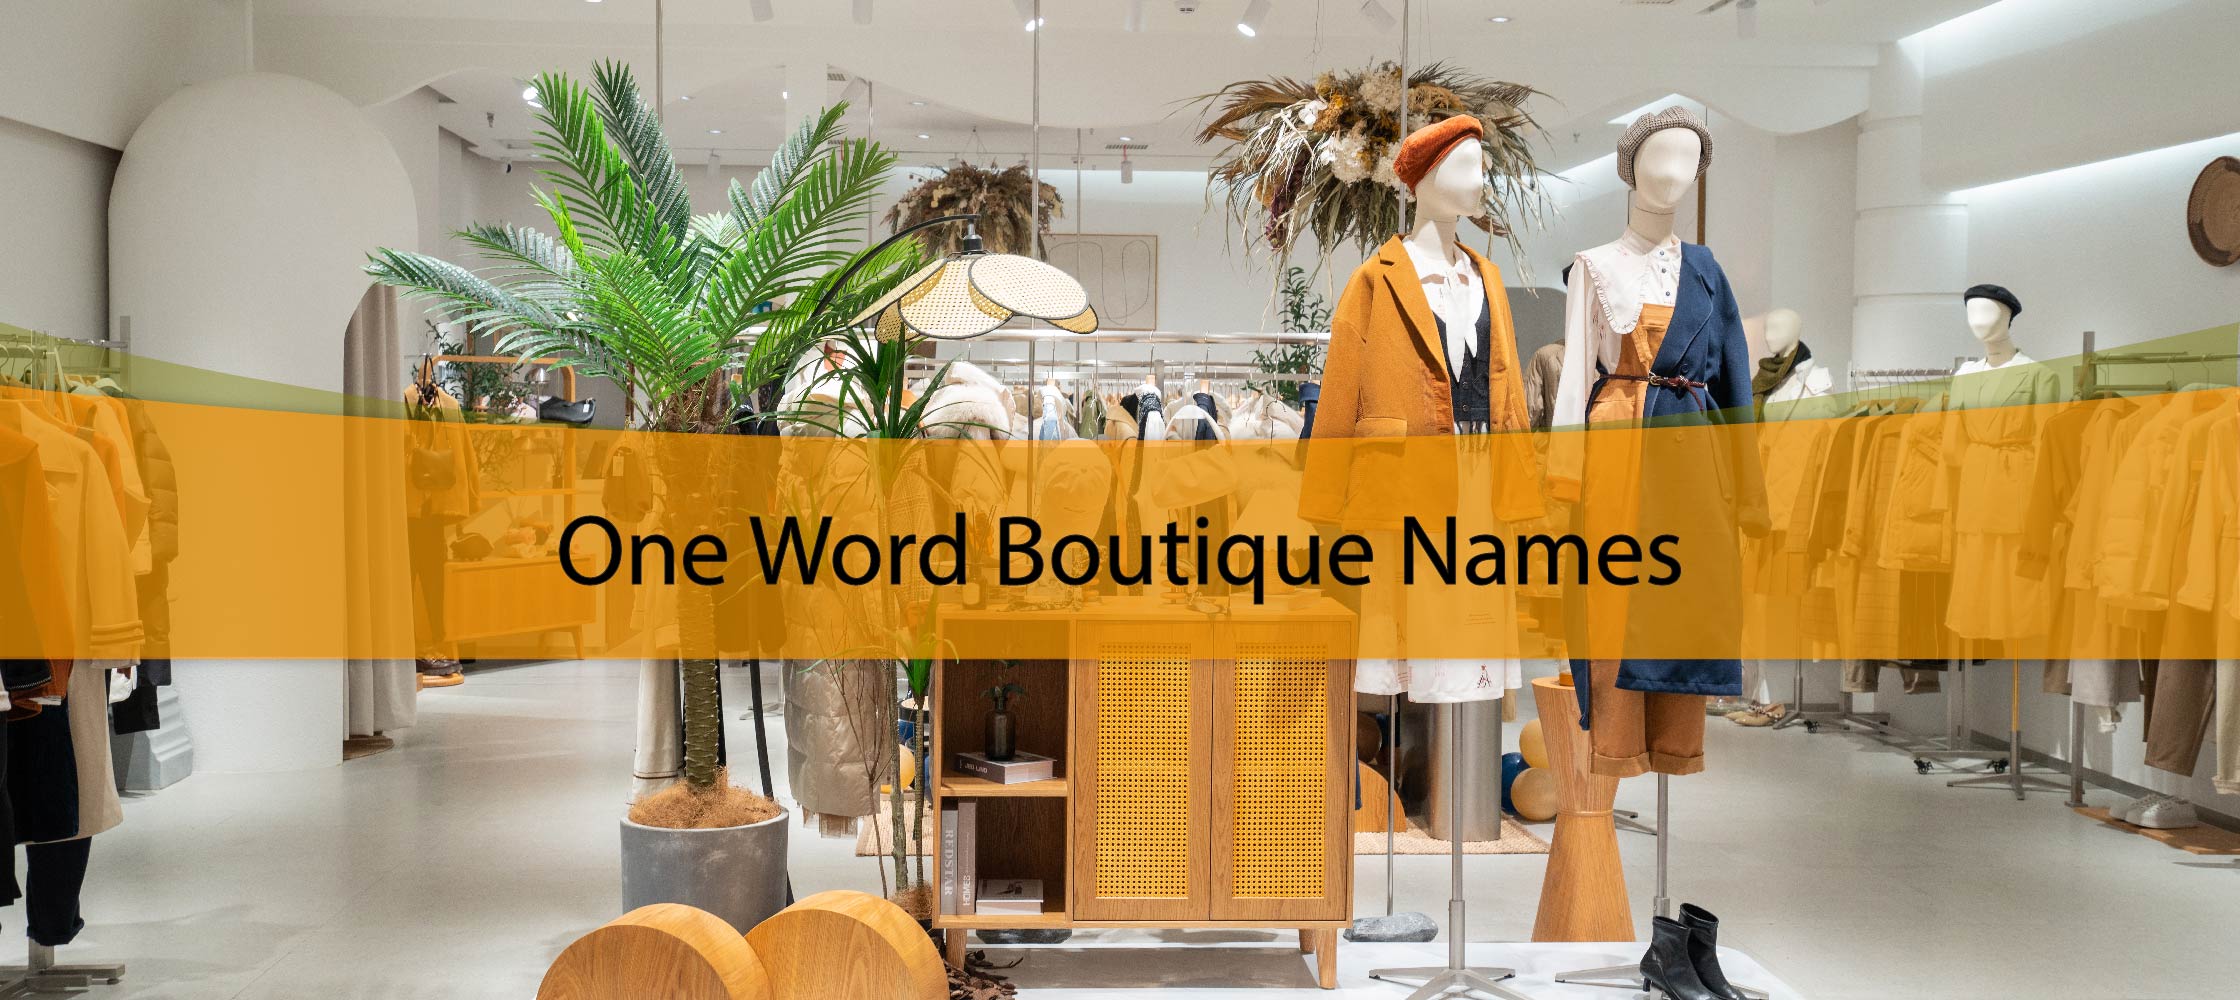 One Word Boutique Names